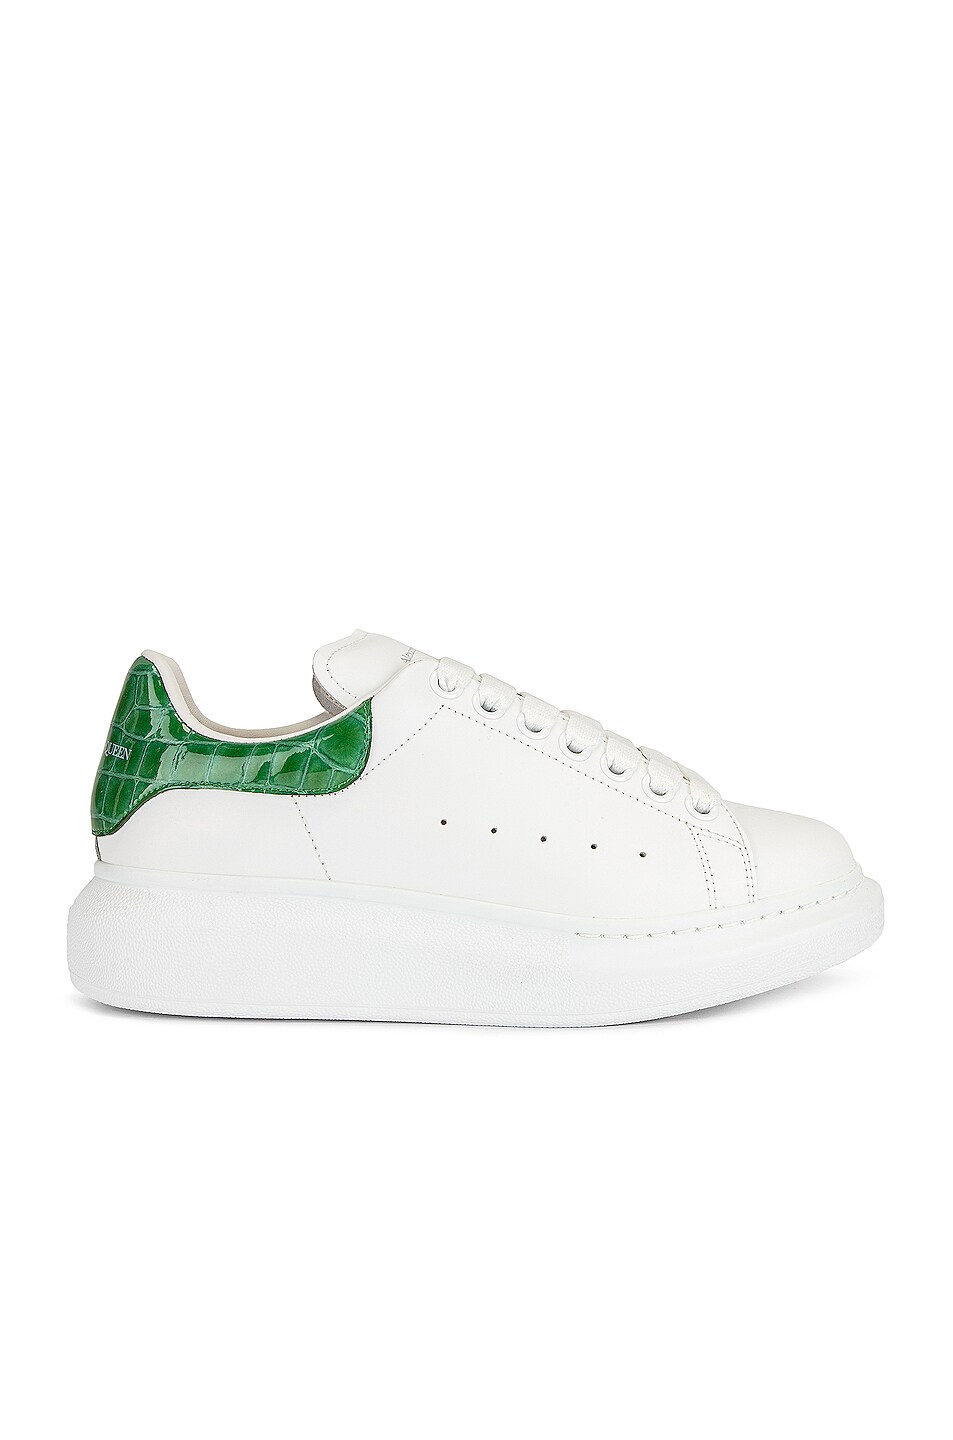 Image 1 of Alexander McQueen Lace Up Sneakers in White & Chrome Green